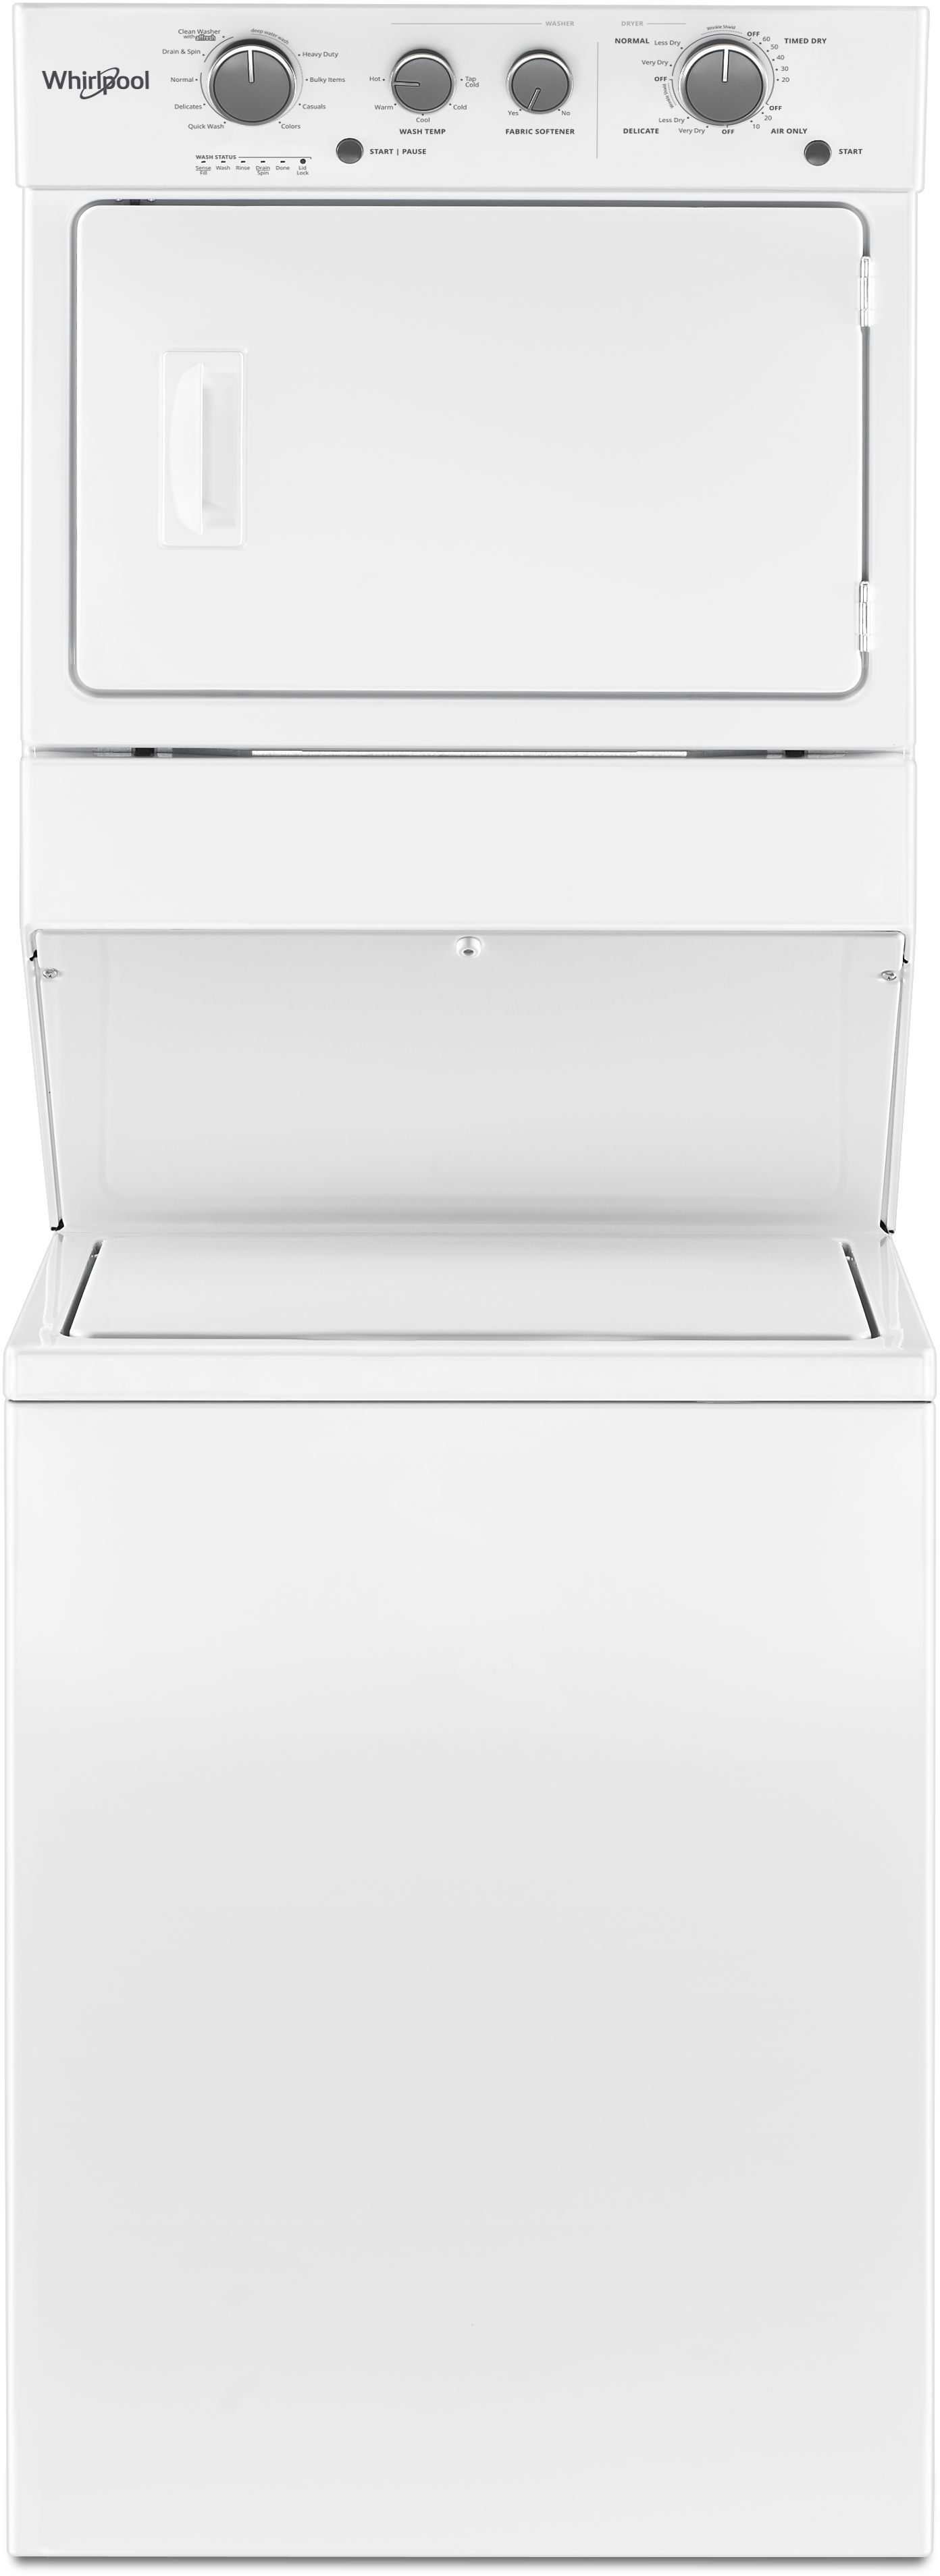 Whirlpool® 3.5 Cu. Ft. Washer, 5.9 Cu. Ft. Dryer White Electric Long Vent Stacked Laundry-WETLV27HW